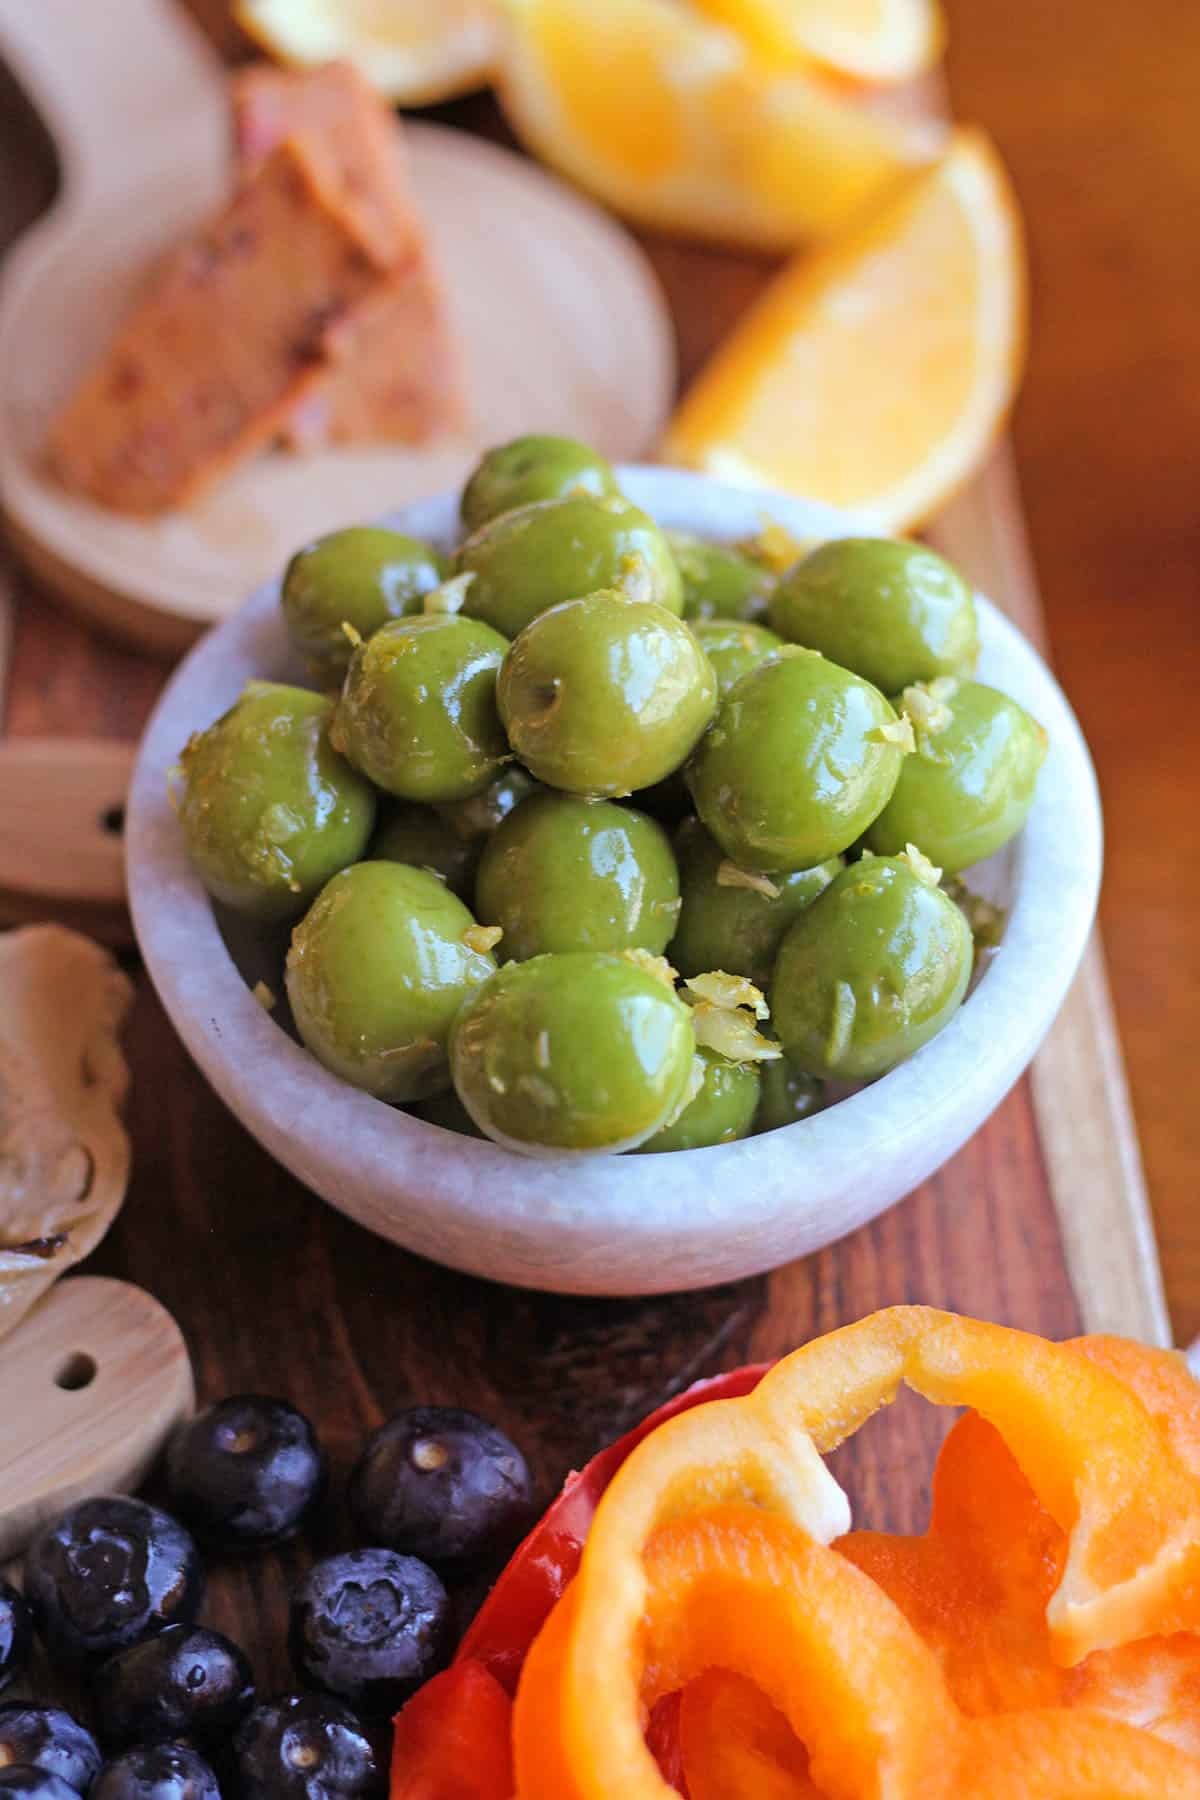 Shiny Castelvetrano olives in bowl by berries and bell peppers.